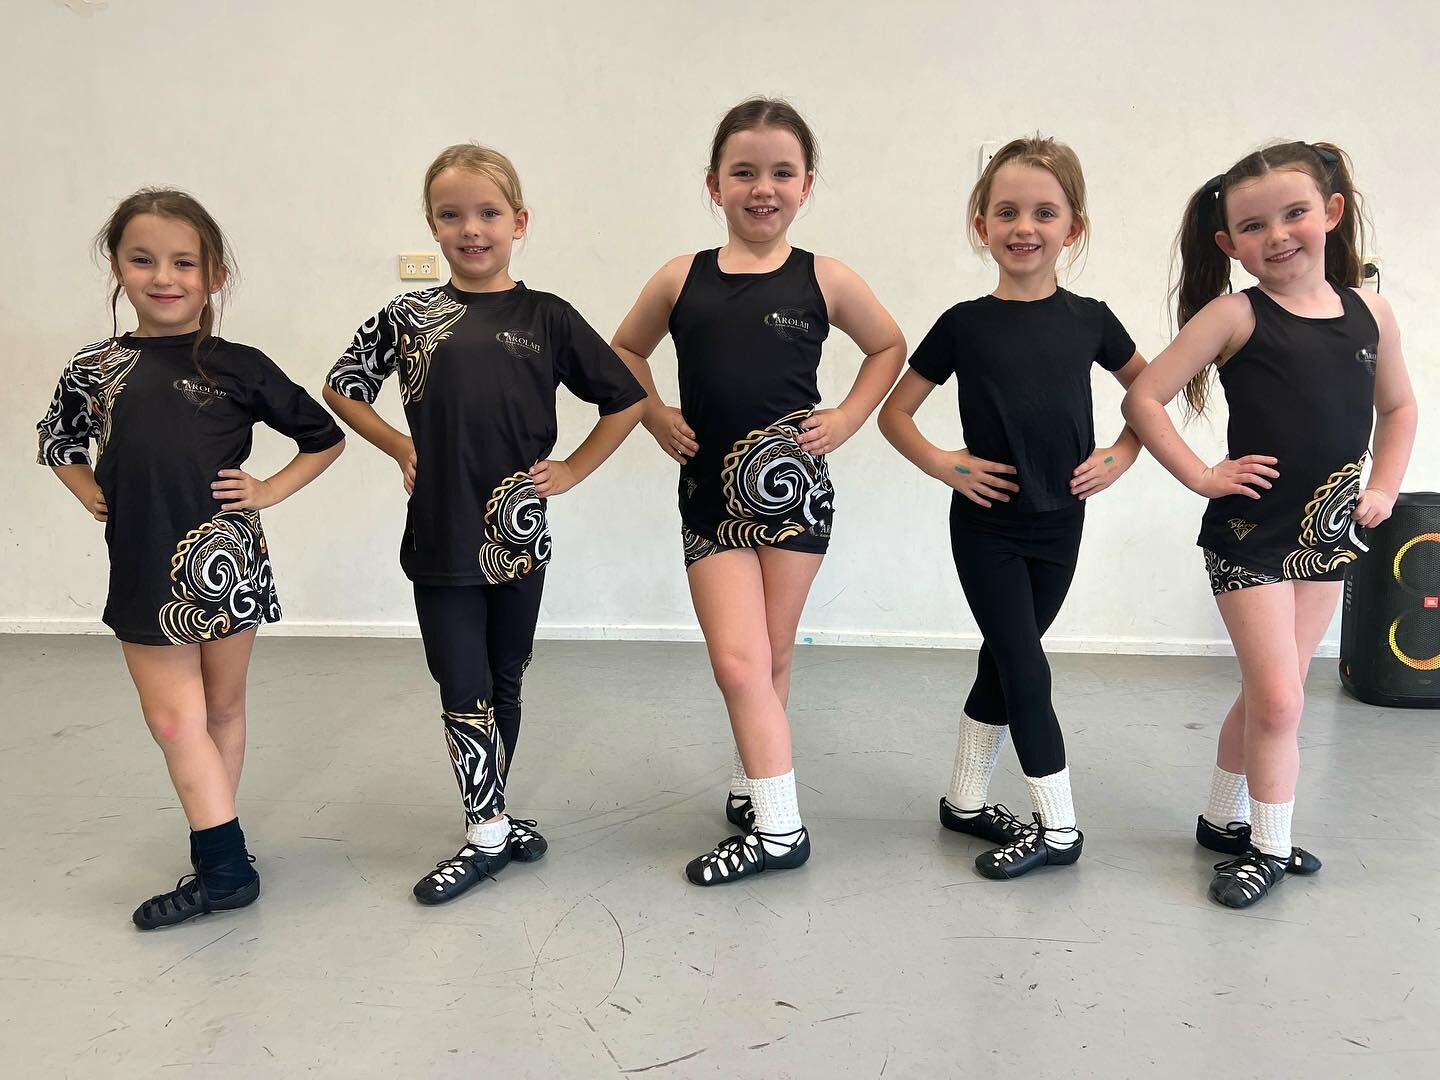 Last classes done for all of our superstars before the @sunshinestatechampionships ! Can&rsquo;t wait to watch you all perform on stage! 🤩🤩🤩

#thecarolanacademy #sunshinestatechampionships2023 #irishdancers #irishdancing #irishdance